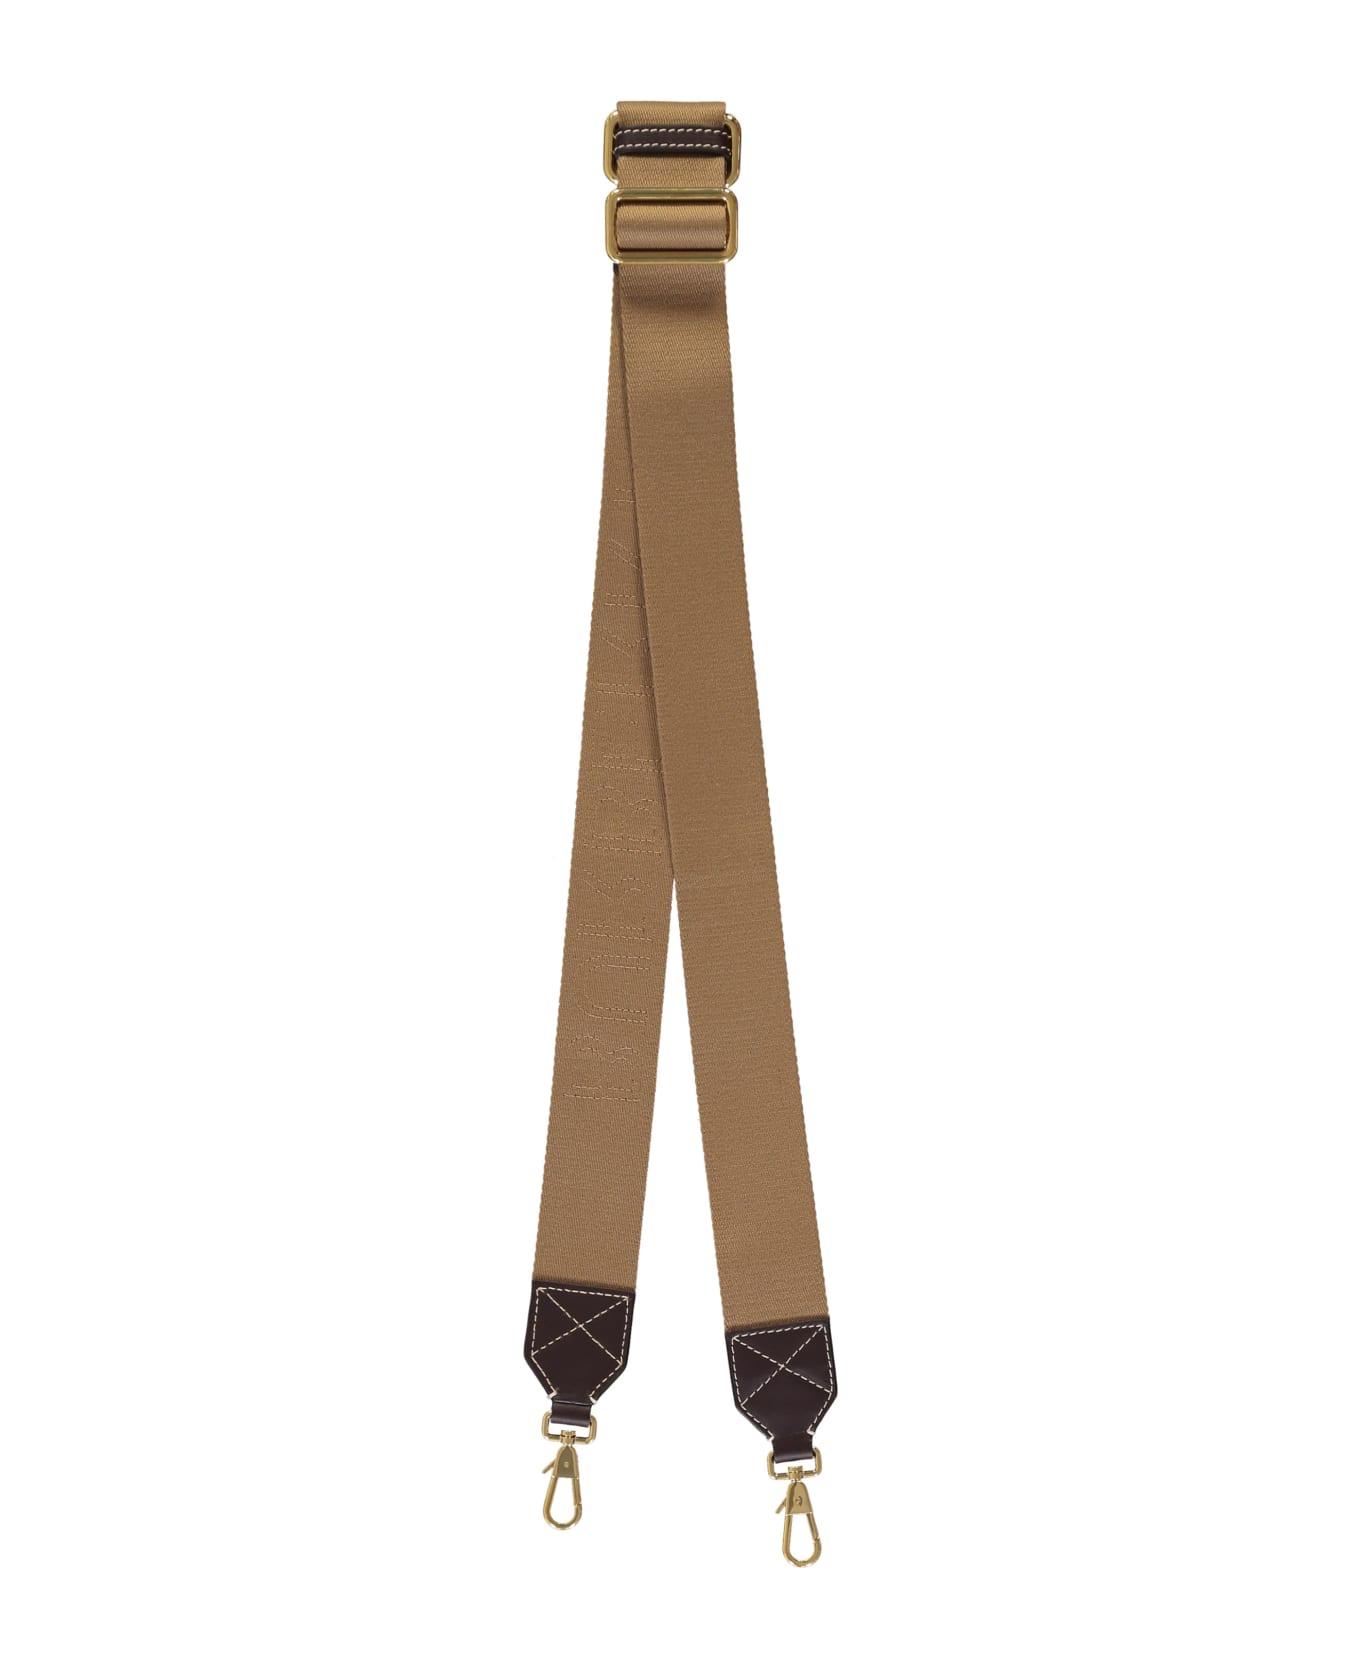 Burberry Adjustable And Removable Fabric Shoulder Strap - brown